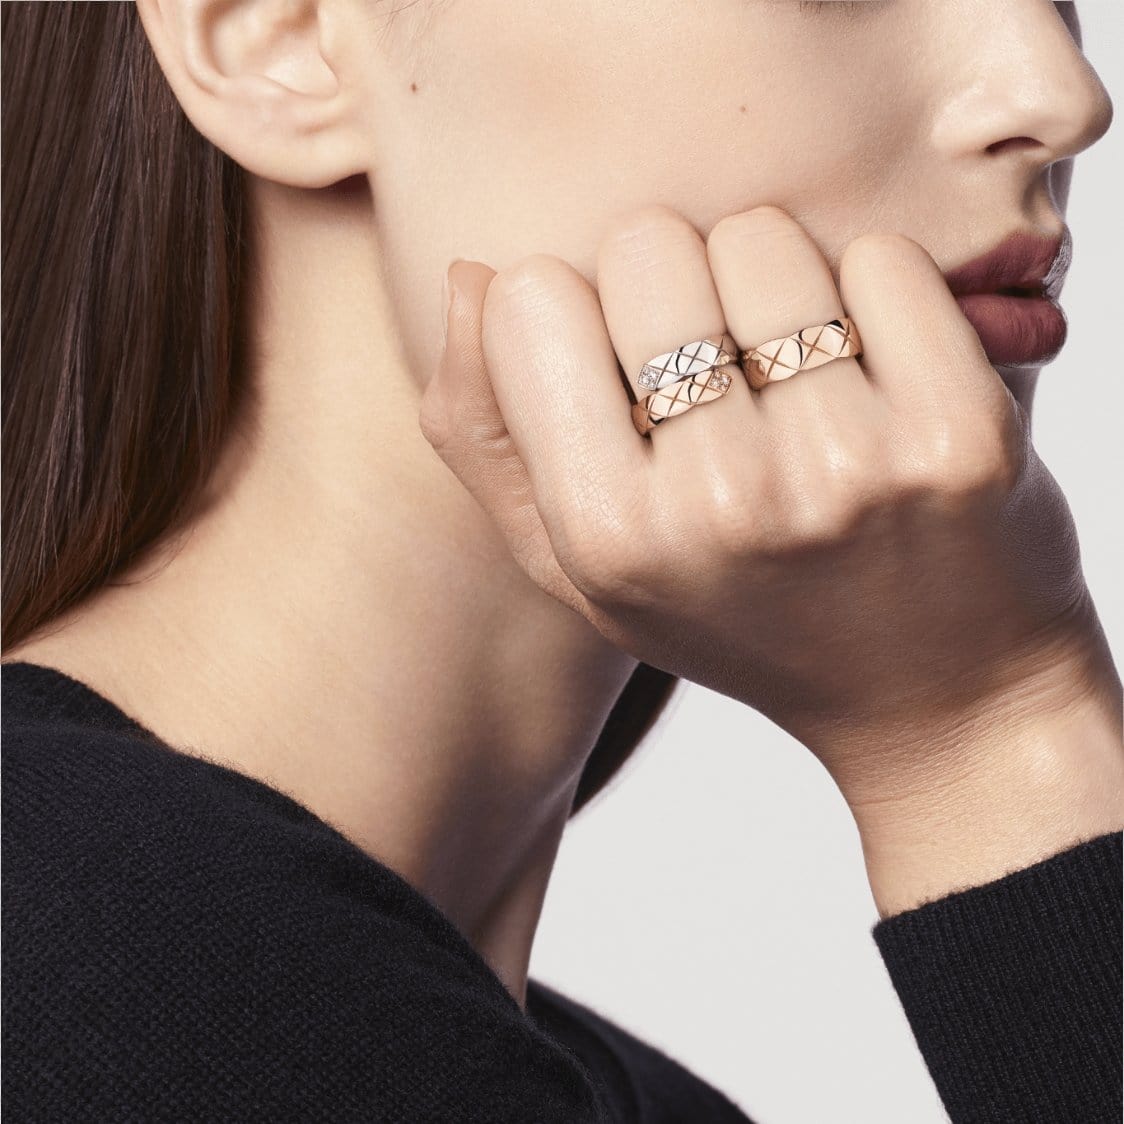 Shop CHANEL Coco Crush Ring (J11101) by Marchedeluxe